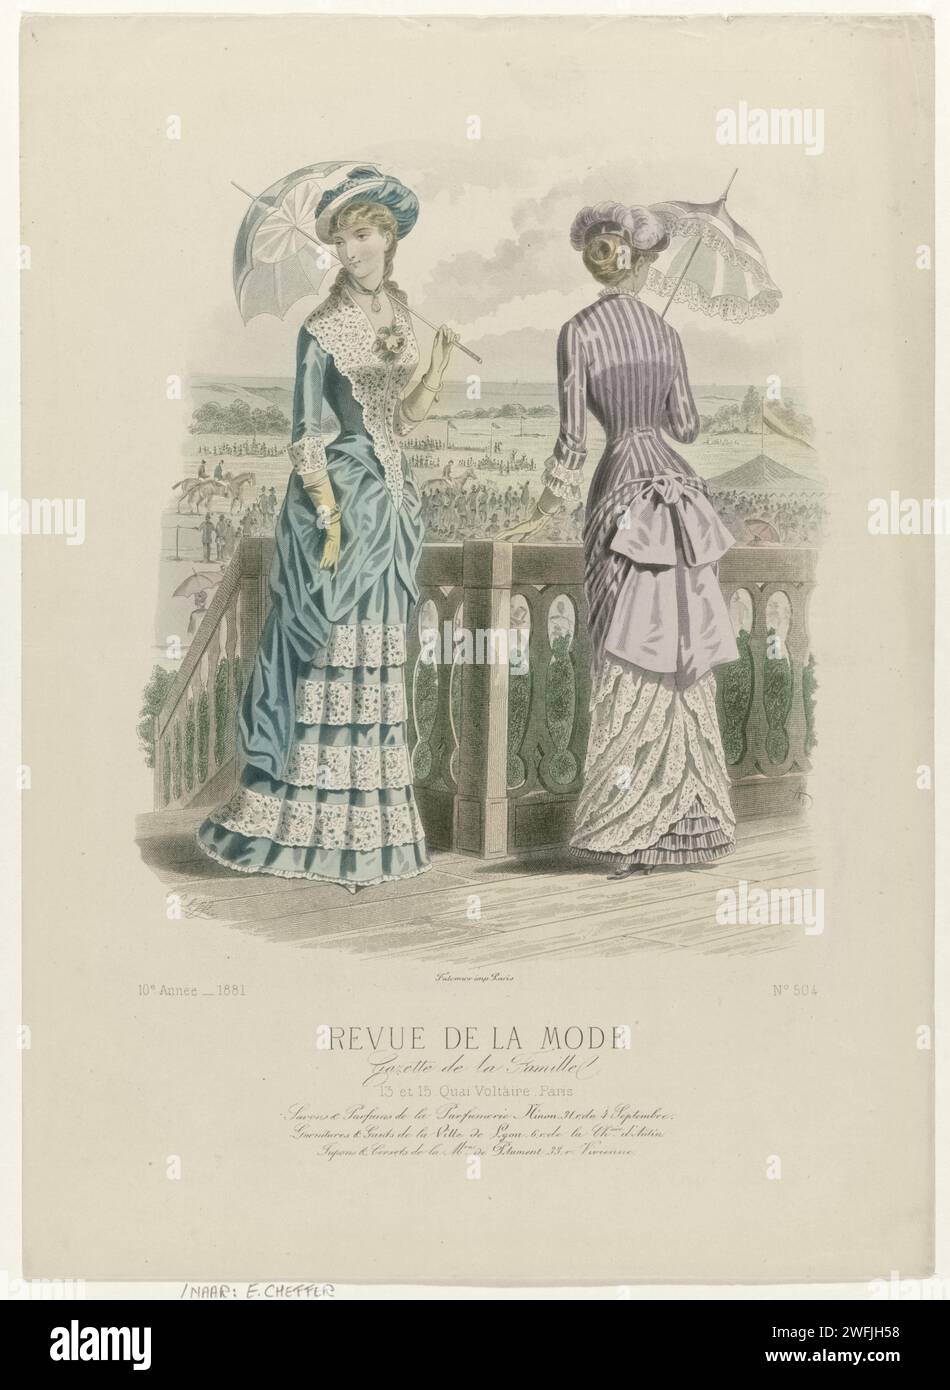 Fashion review, family gazette, Sunday August 28, 1881, 10th year, no. 504: soaps & perfumes of Ninon perfumery (...), E. Cheffer, 1881  Two women with parasols, dressed in 'toilets' for the horse races. Left: dress of light green 'satin merveilleux' (satin) and ecrus -lean linen side (guipure). Right: 'toilette' of purple 'pékin' with stripes of moiré, decorated with white lace. Under the performance some lines of advertising text for different products. Print from the fashion magazine Revue de La Mode (1872-1913). Detailed description of the clothing on page 292 'planche coloriée'. Paris pap Stock Photo